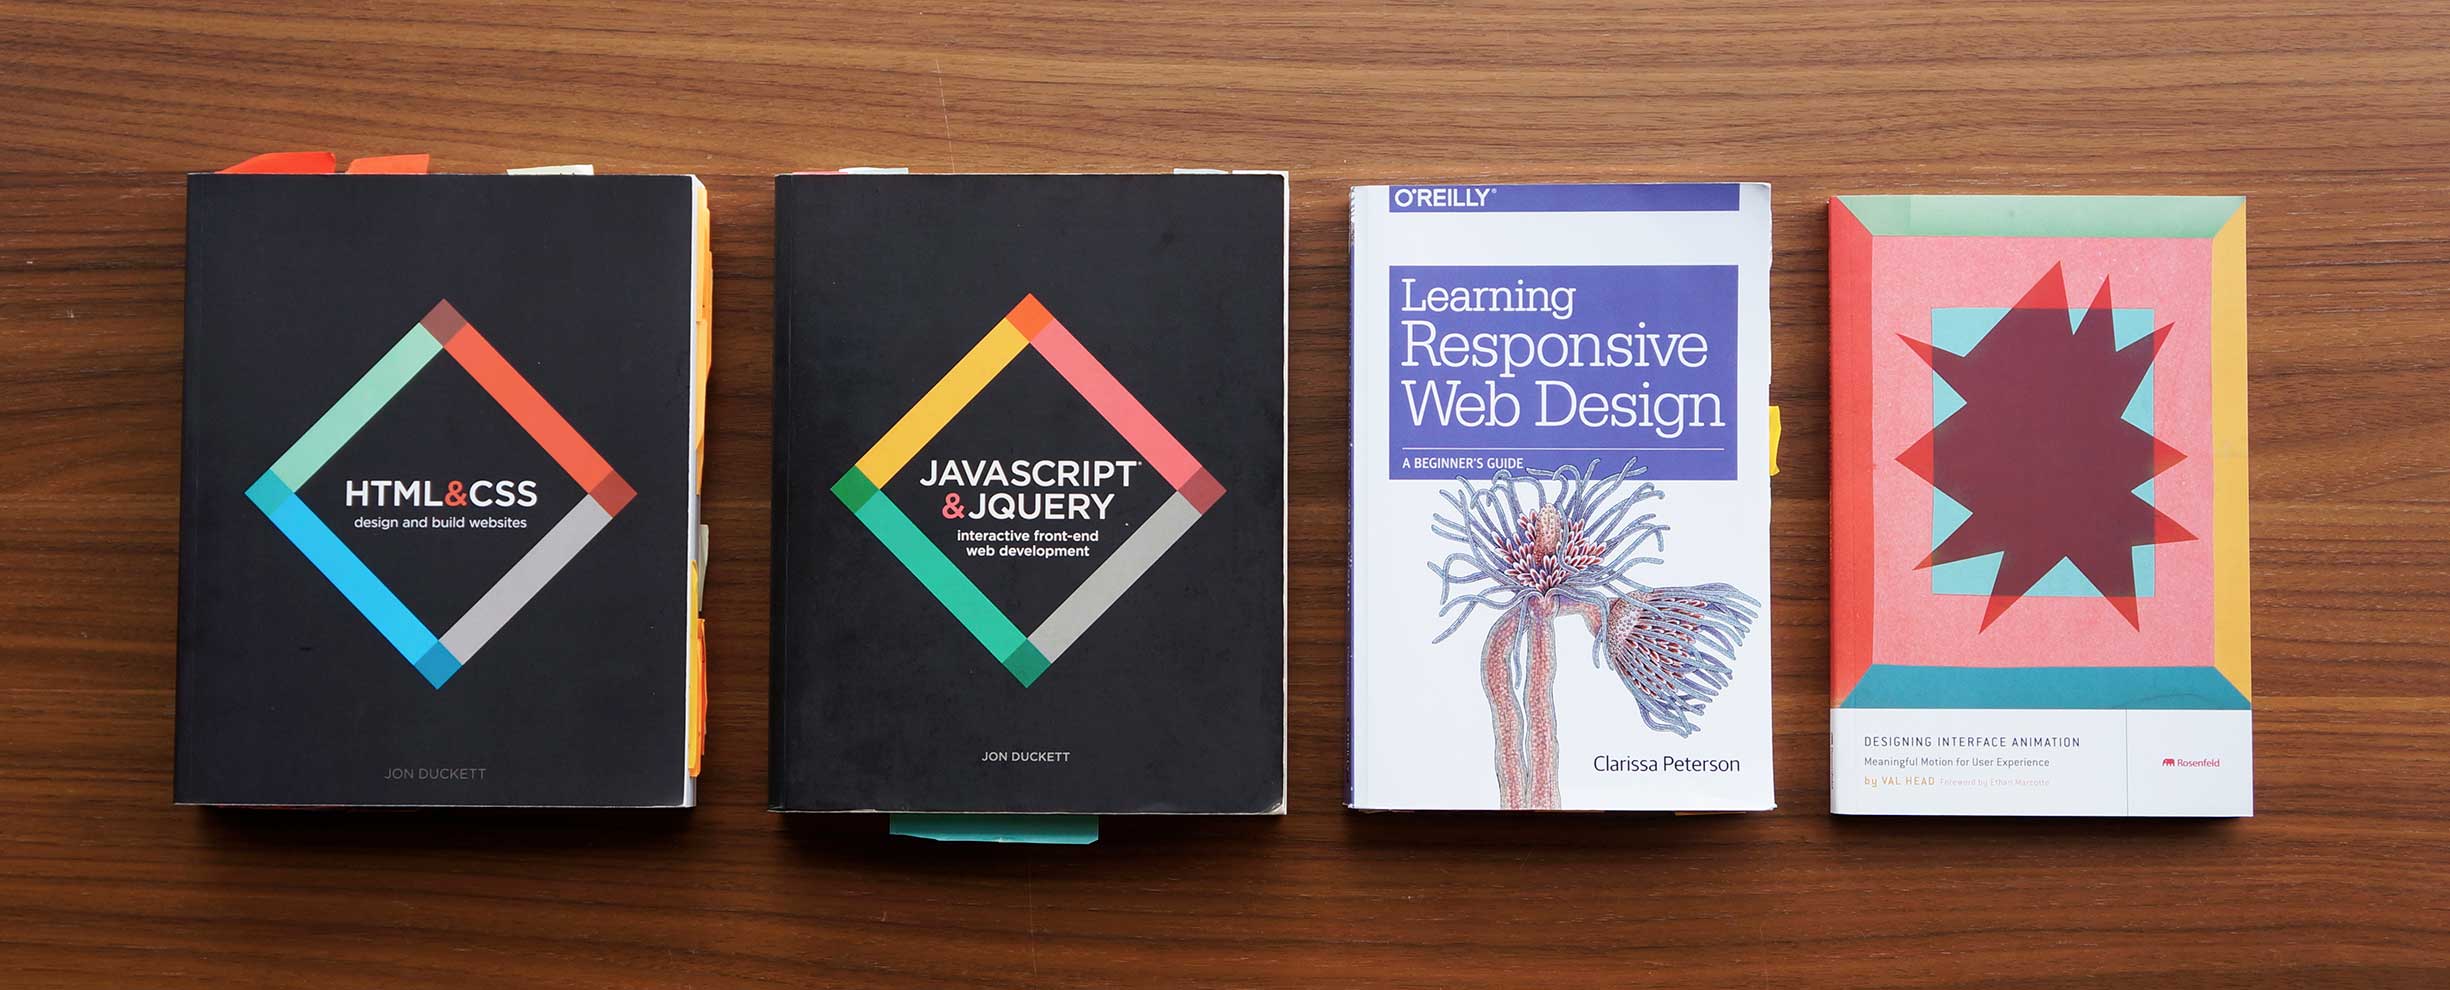 “HTML & CSS” and “JavaScript & JQuery” by Jon Duckett; “Learning Responsive Web Design” by Clarissa Peterson, published by O'Reilly; “Designing Interface Interaction” by Val Head.